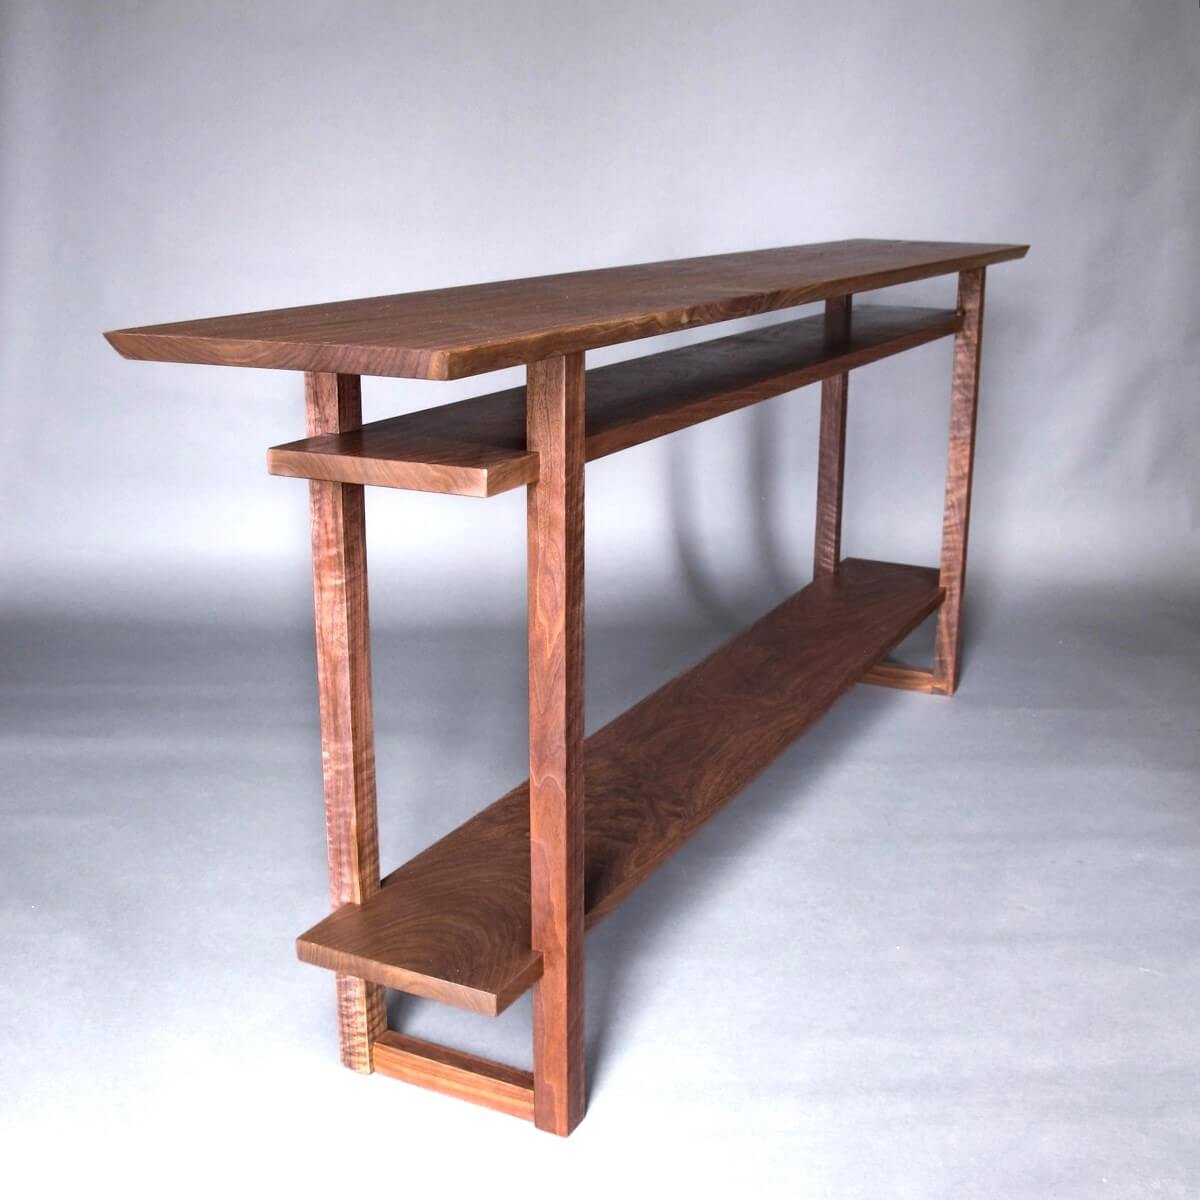 A long modern console table handcrafted from solid walnut wood for hallways and entryways by Mokuzai Furniture.